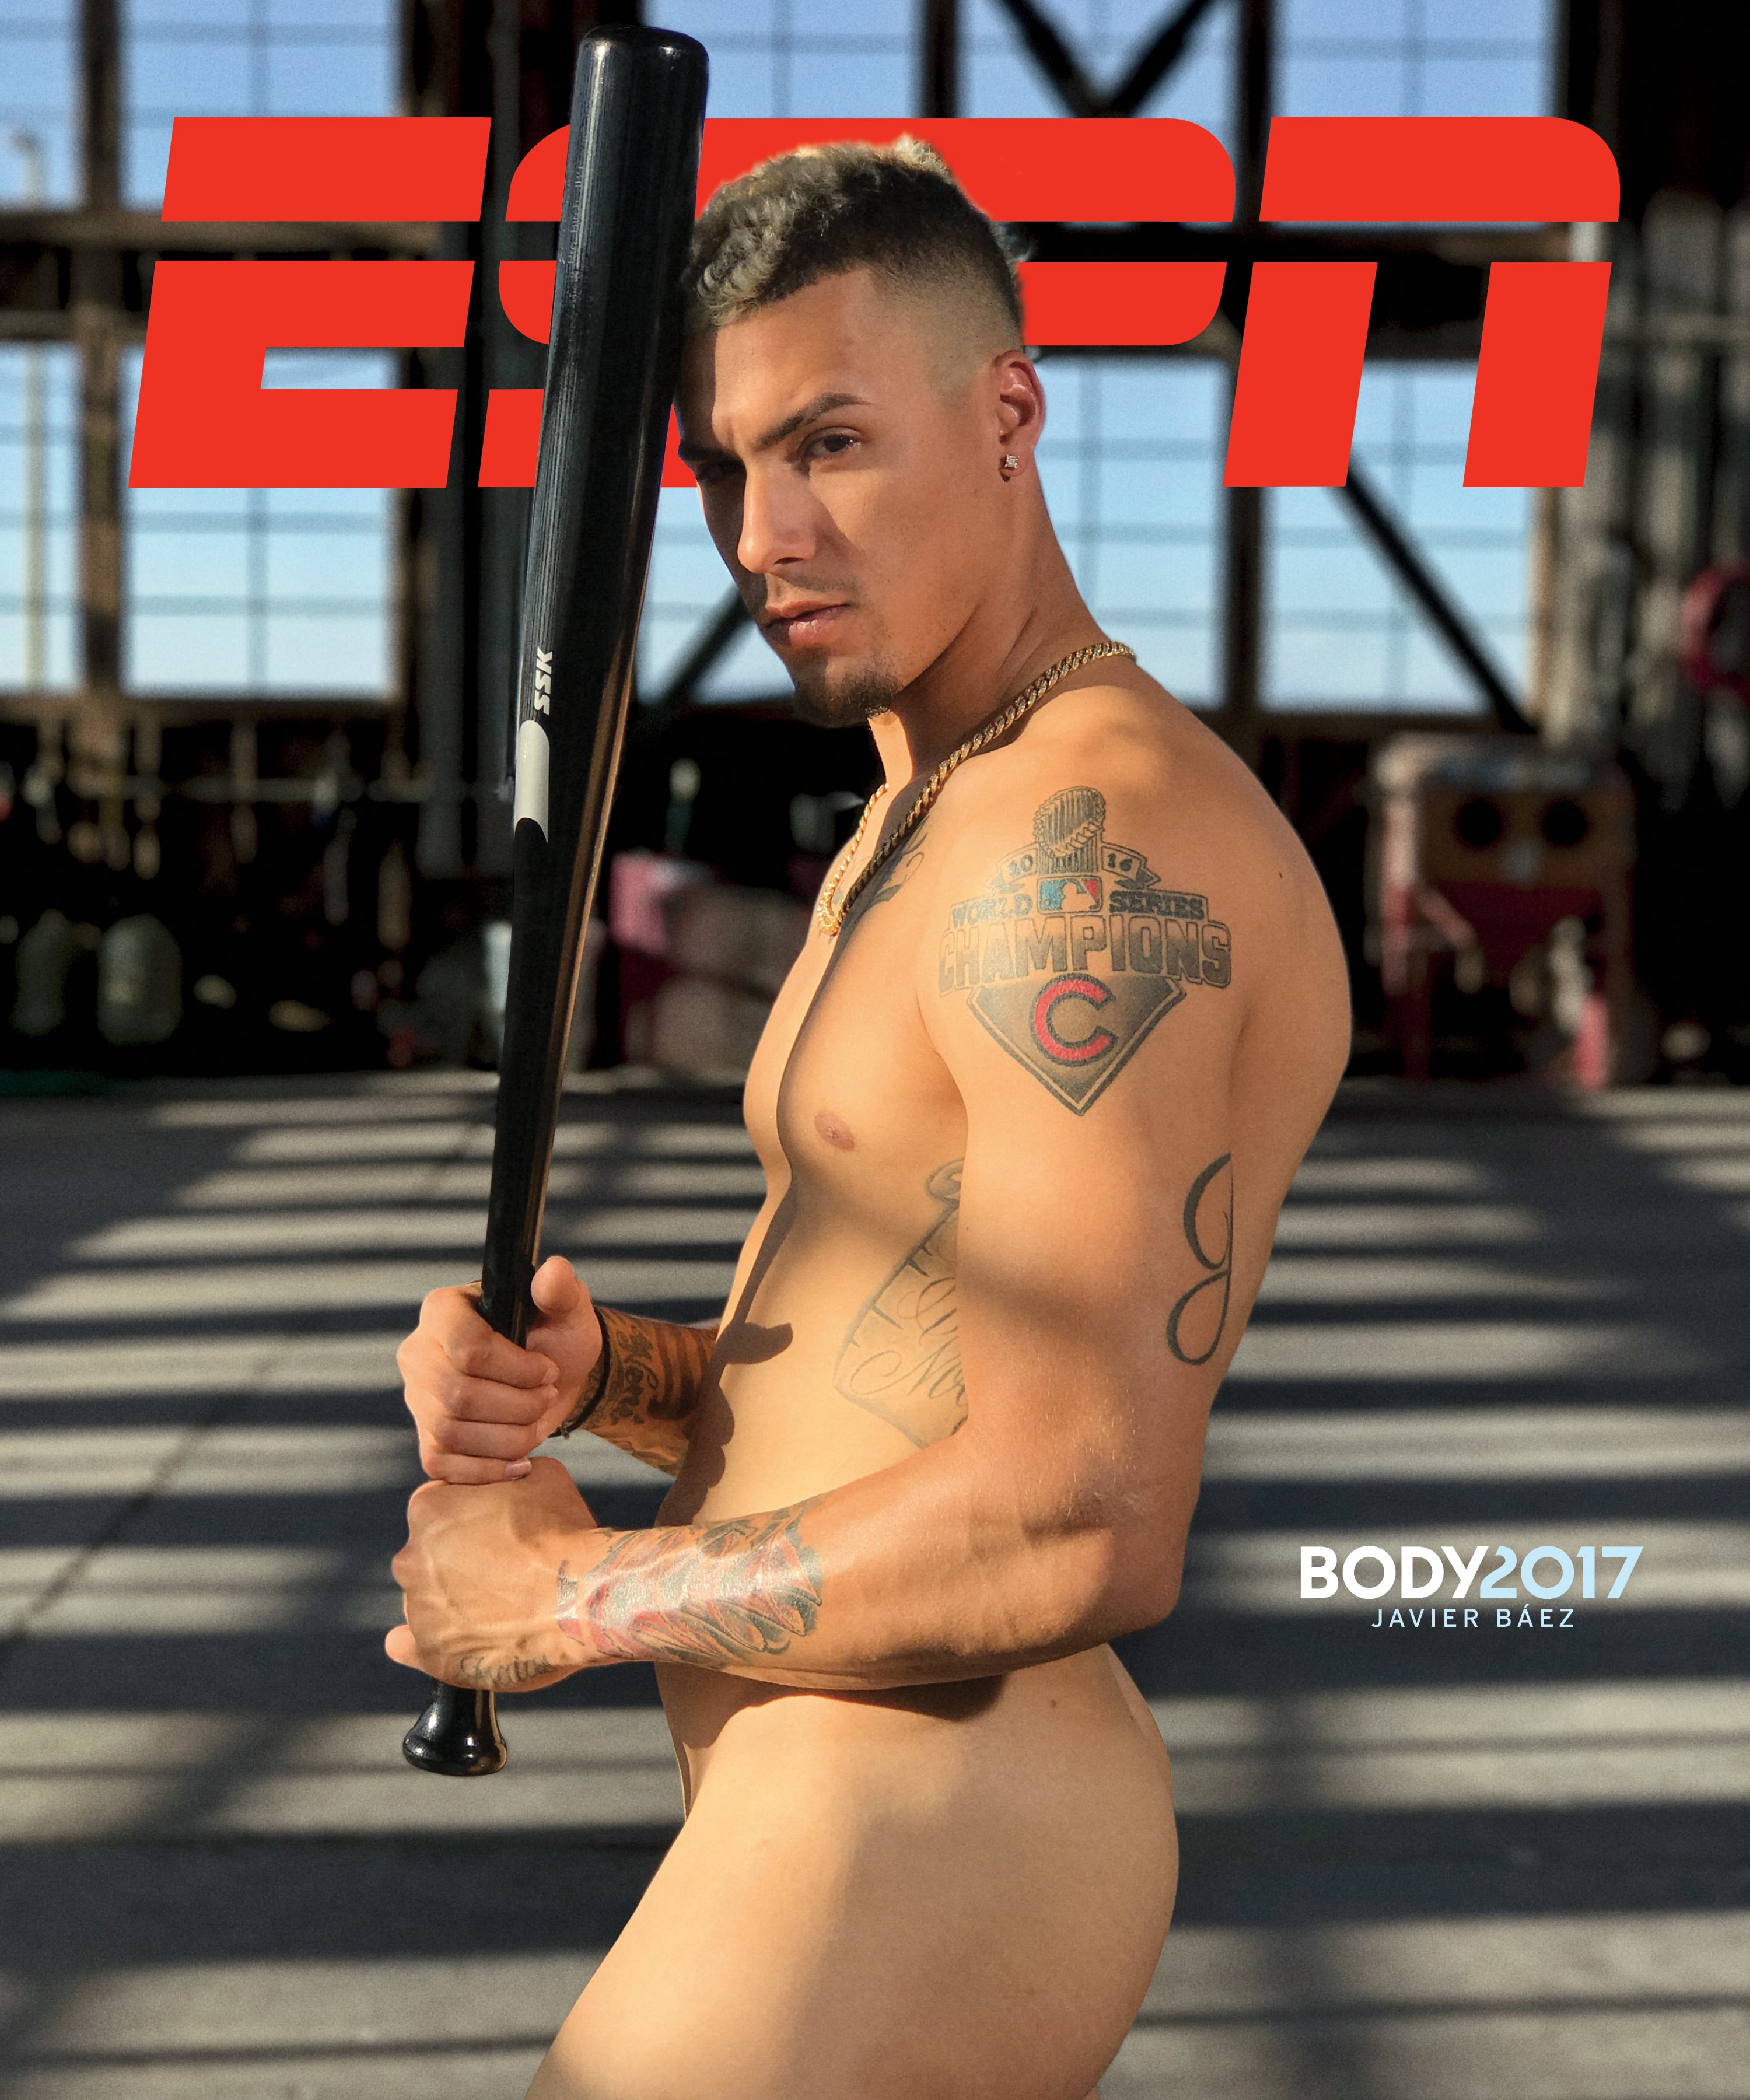 Chicago Cubs' Javier Baez Naked on ESPN 'Body' Issue Cover – Rolling Stone